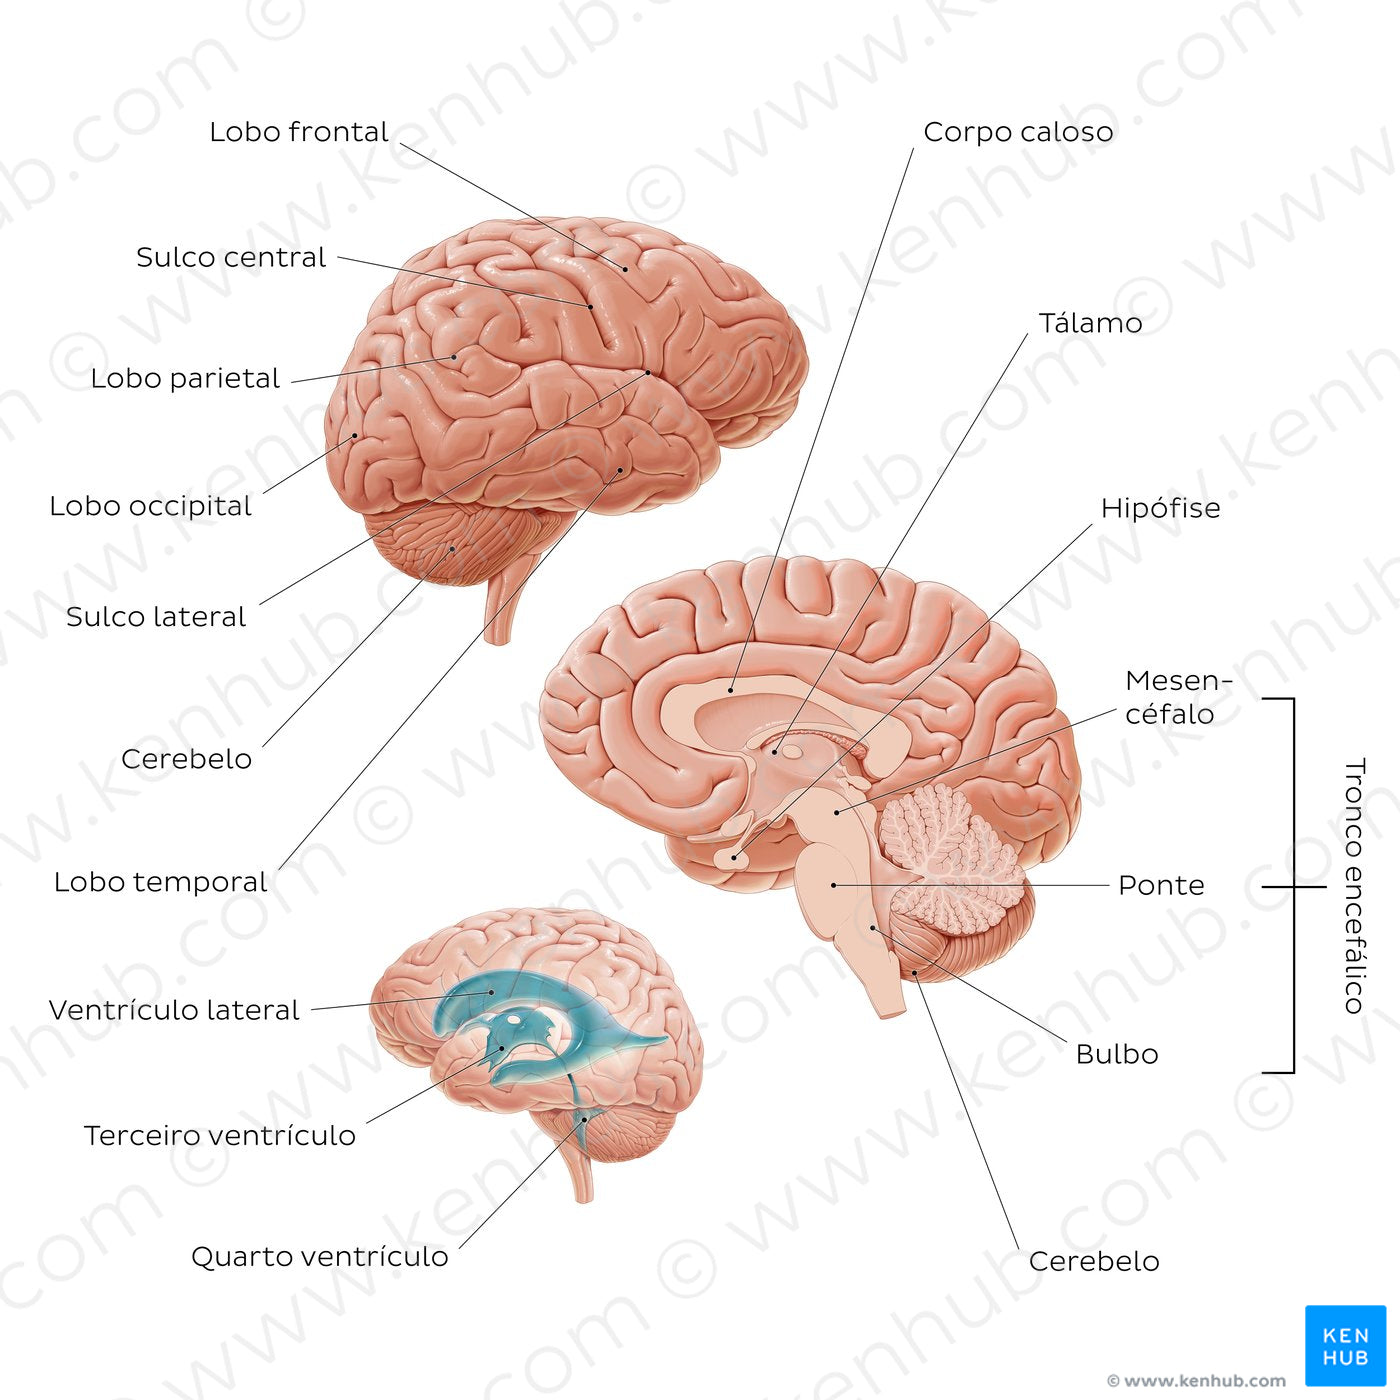 Introduction to the brain (Portuguese)